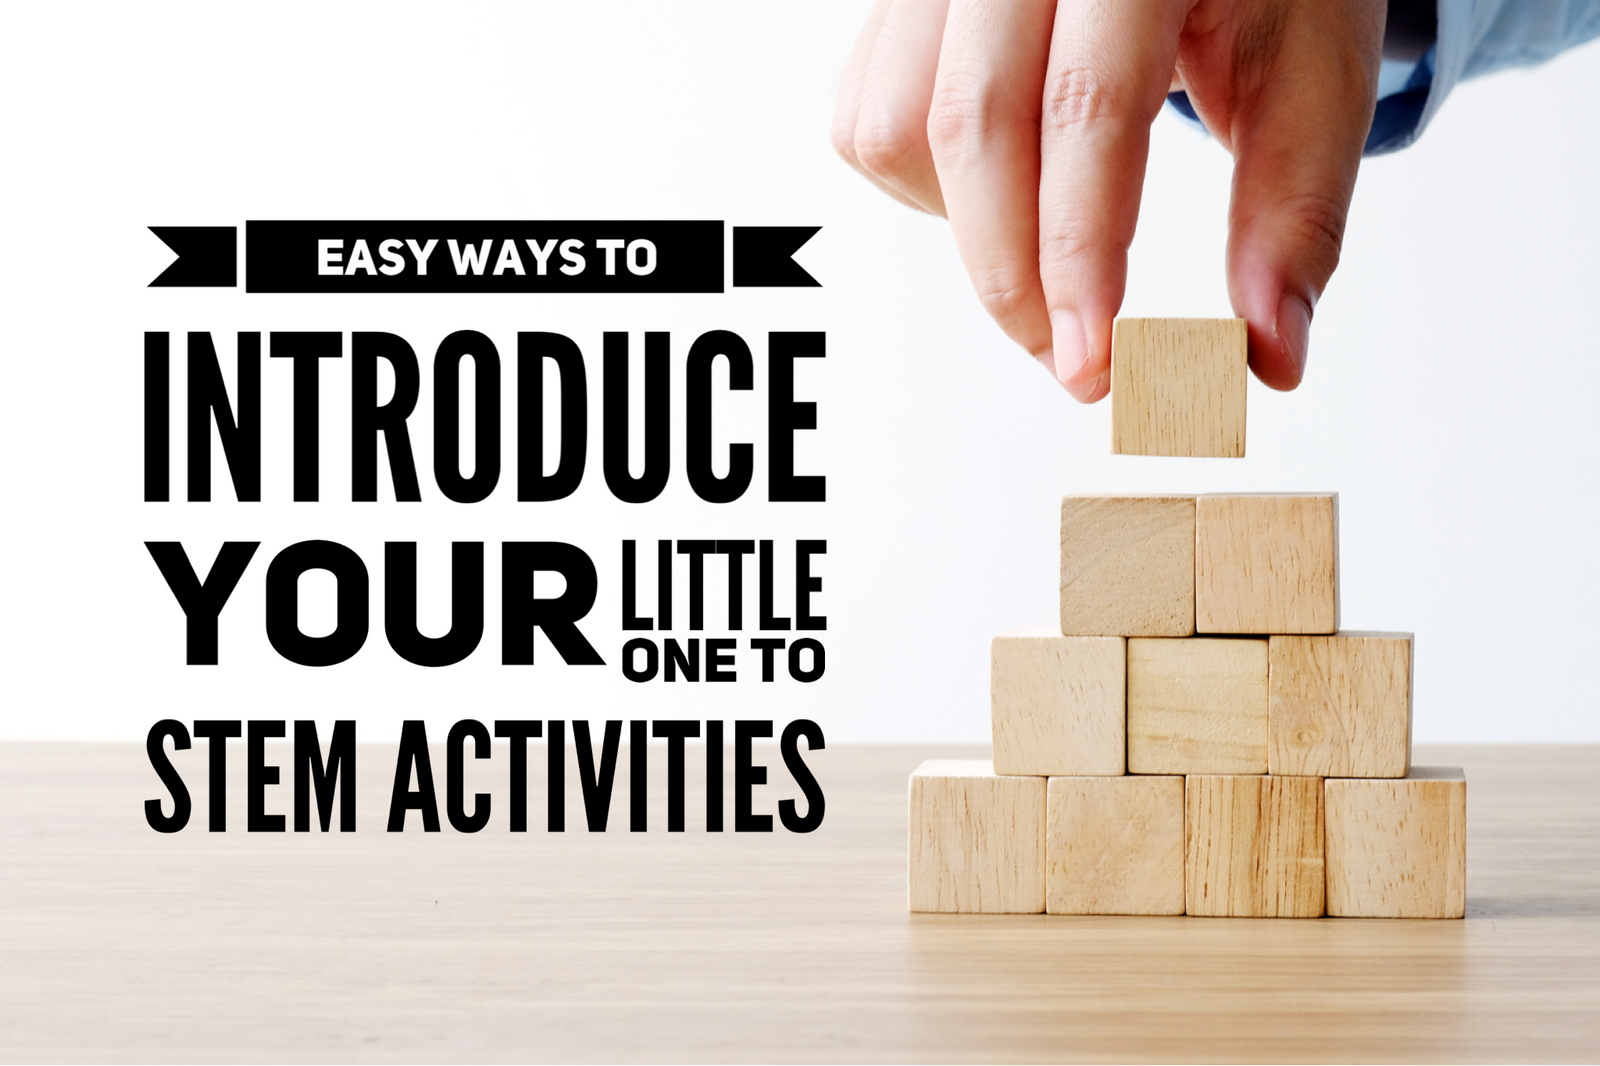 Introduce your little one to stem activities